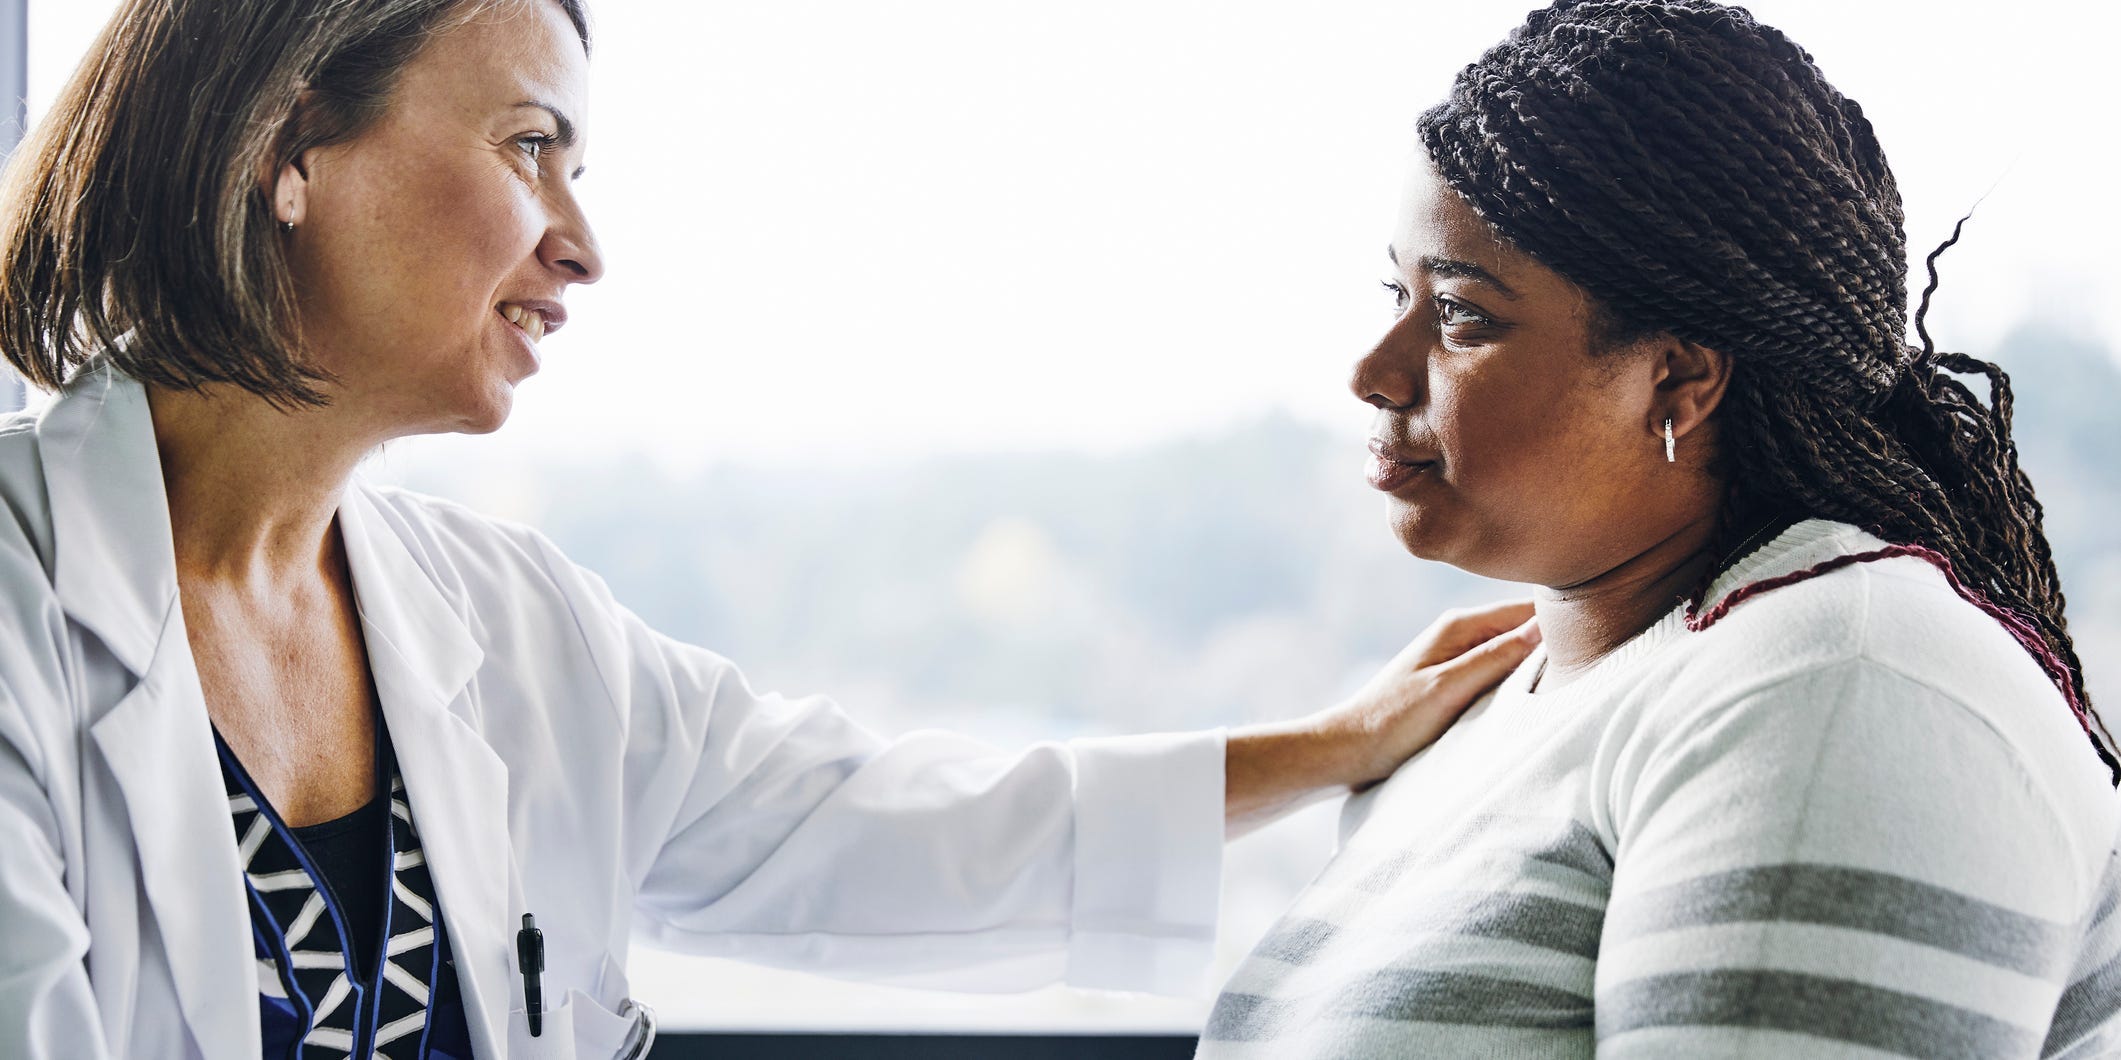 A woman speaks to another woman in a doctor's office setting.